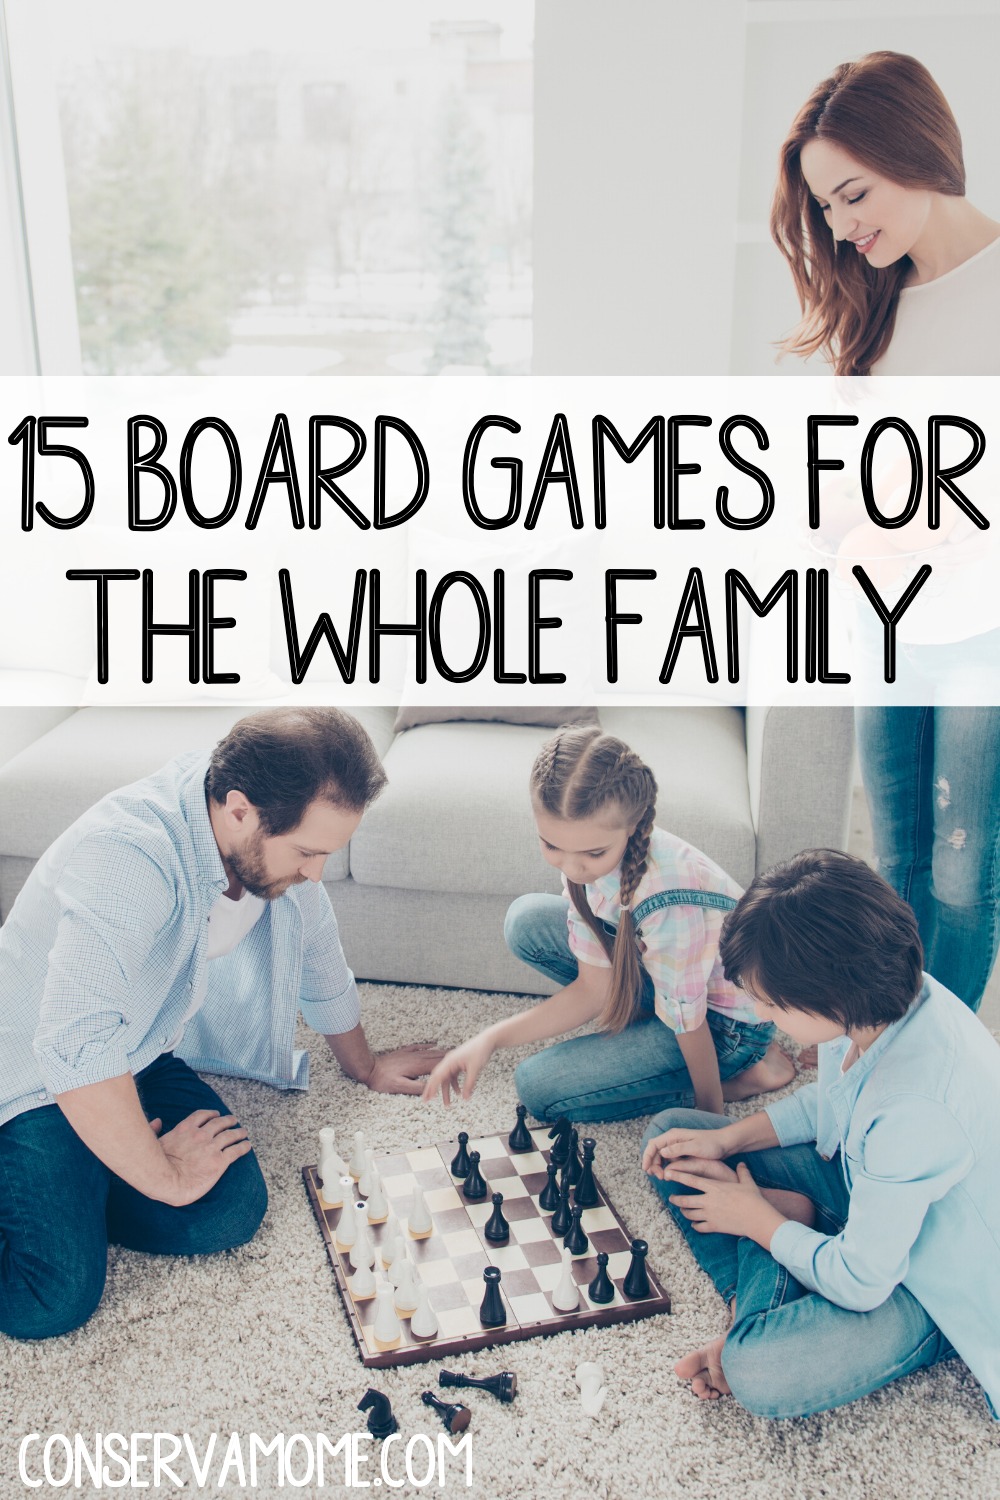 15 Board Games for The Whole Family